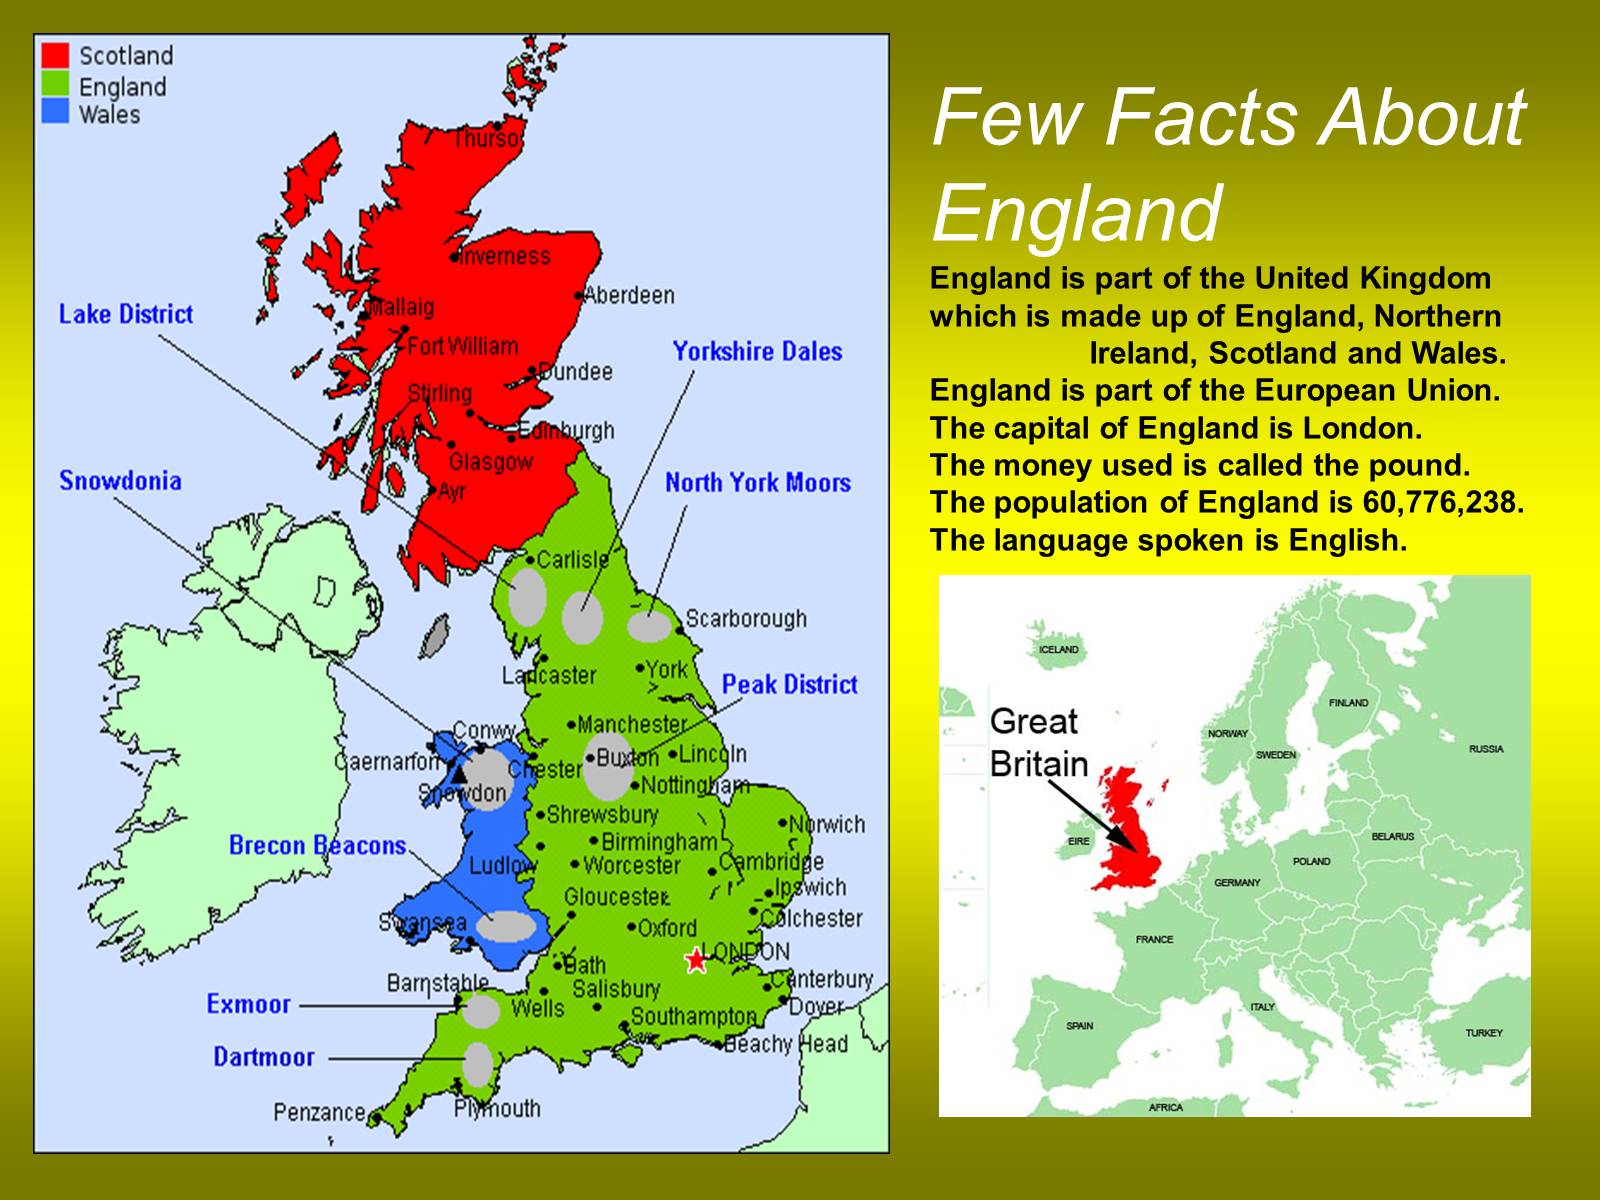 Англия ис. England презентация. About great Britain. Facts about England. Facts about great Britain.